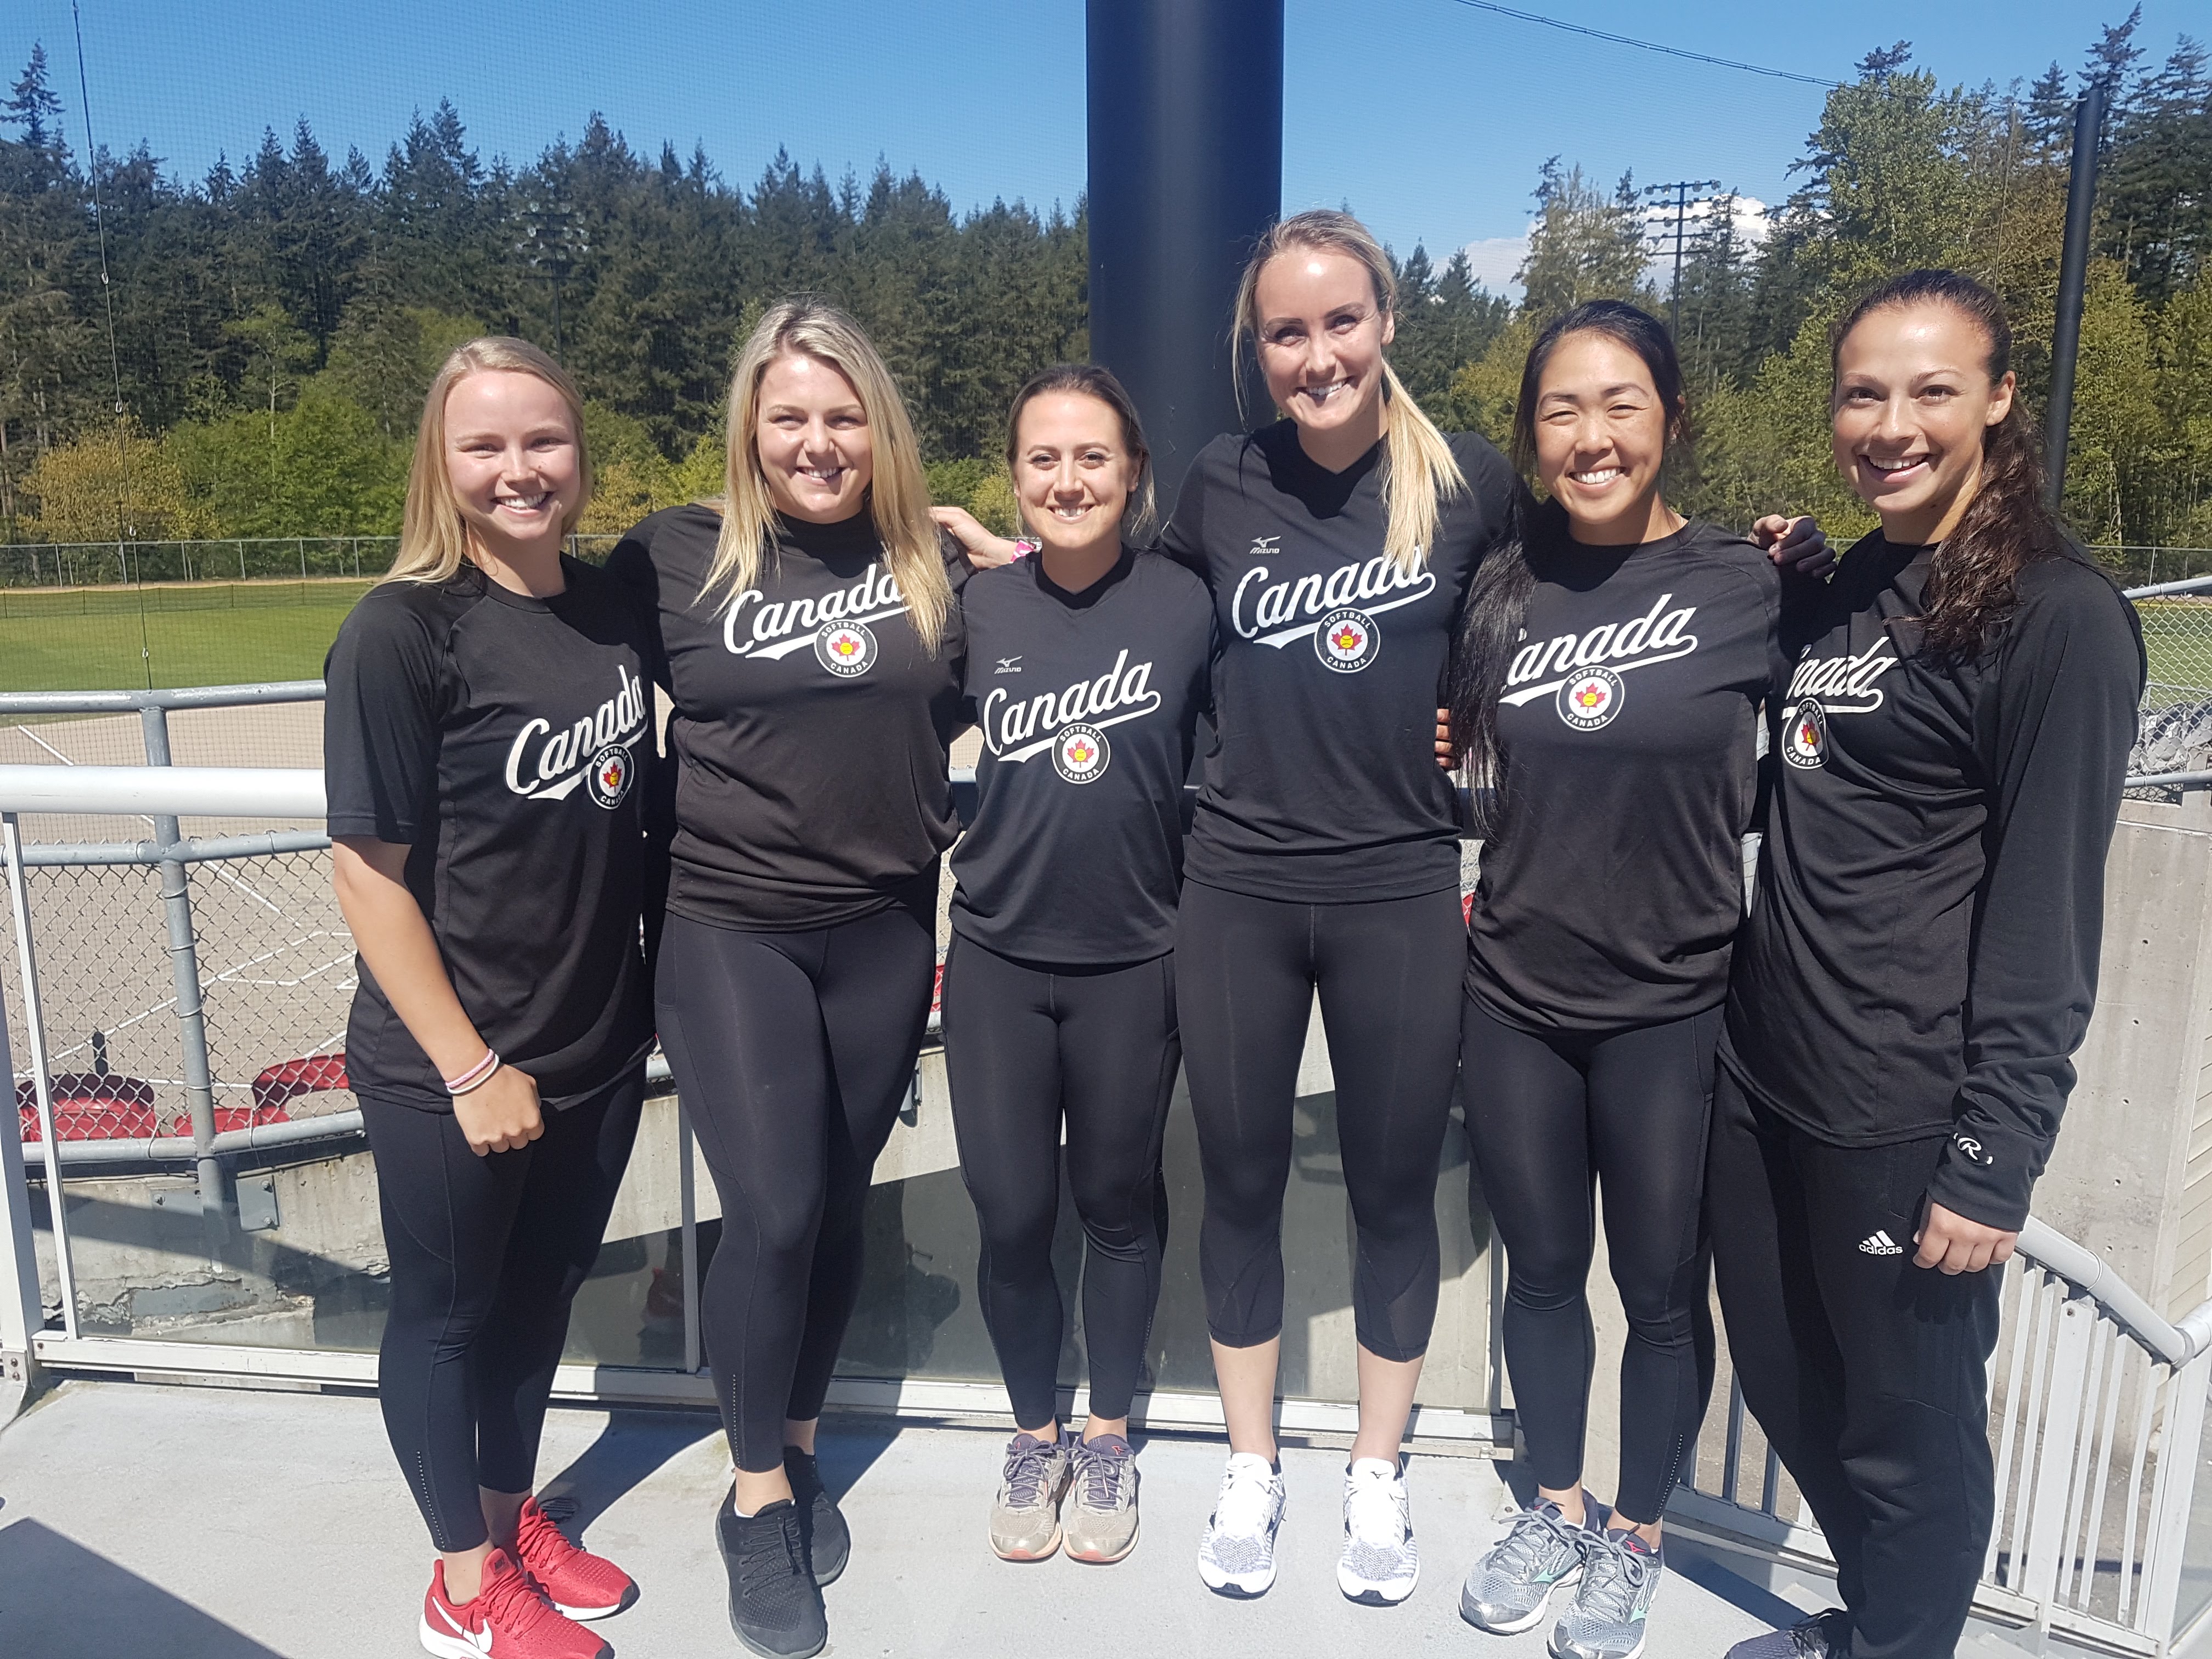 Stage set for Women’s Softball America’s Qualifier happening this summer in Surrey